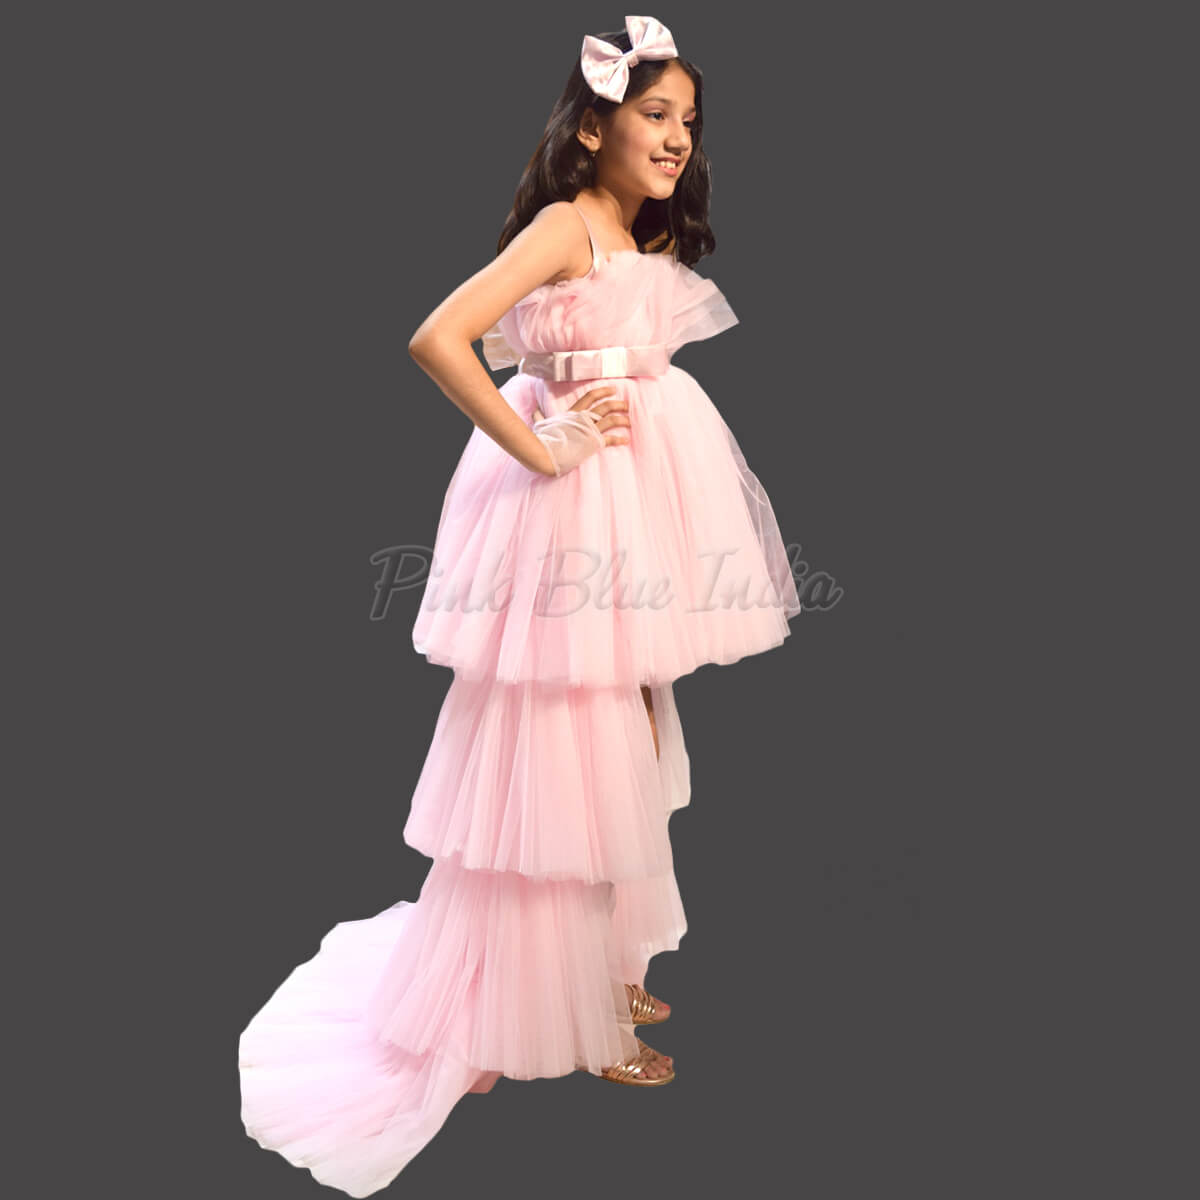 Buy Baby Girl Birthday Party Costume Dress Set Pink with Butterfly Wings  TPW04 (6-12 Months) Online at Low Prices in India - Amazon.in